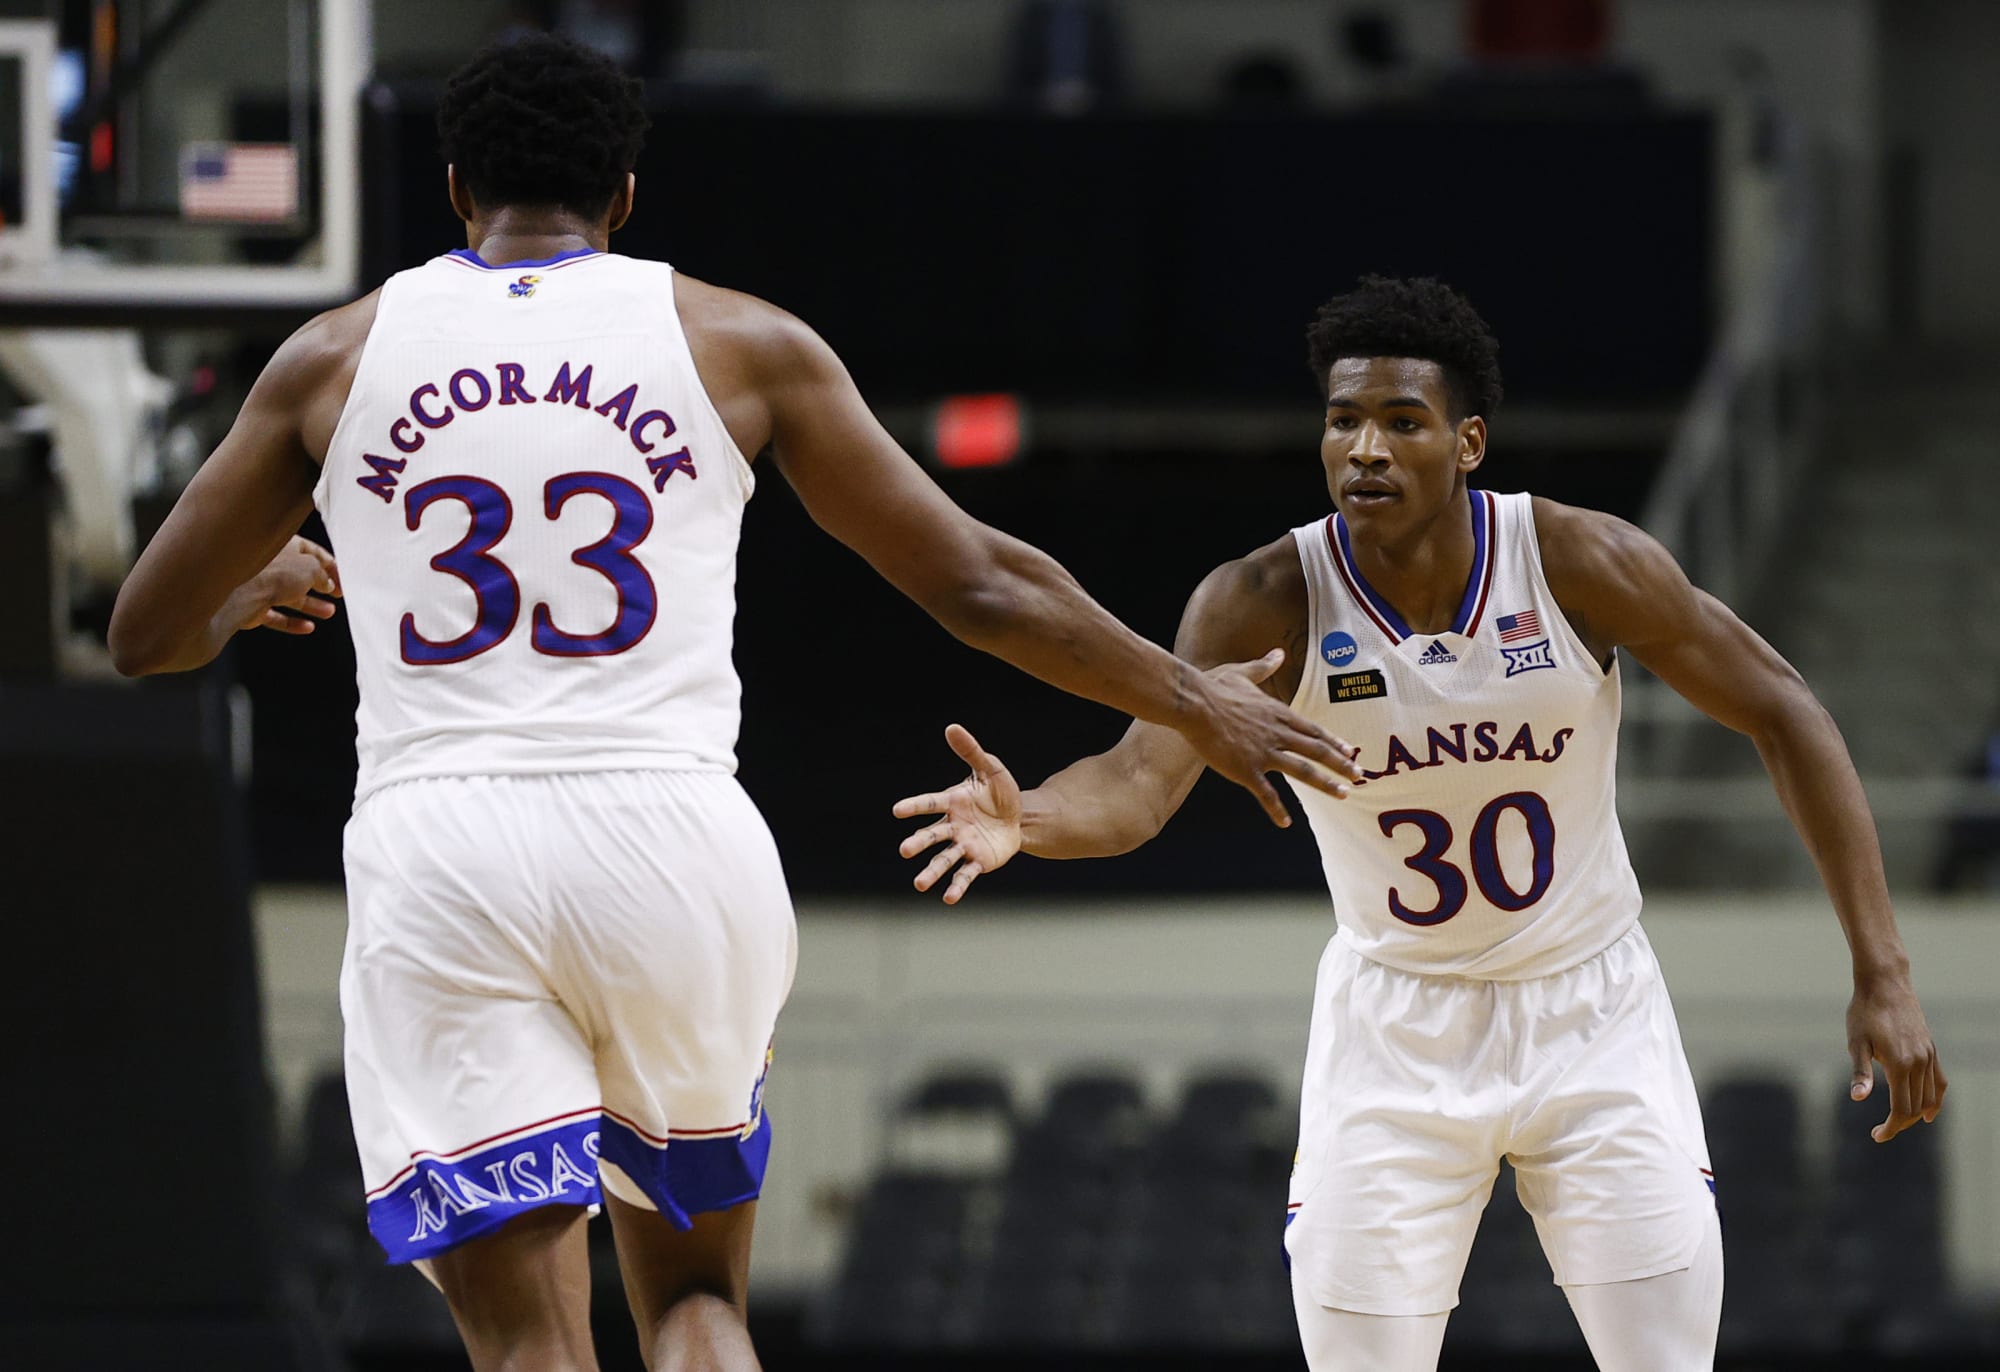 Kansas basketball's experience makes them a national title favorite